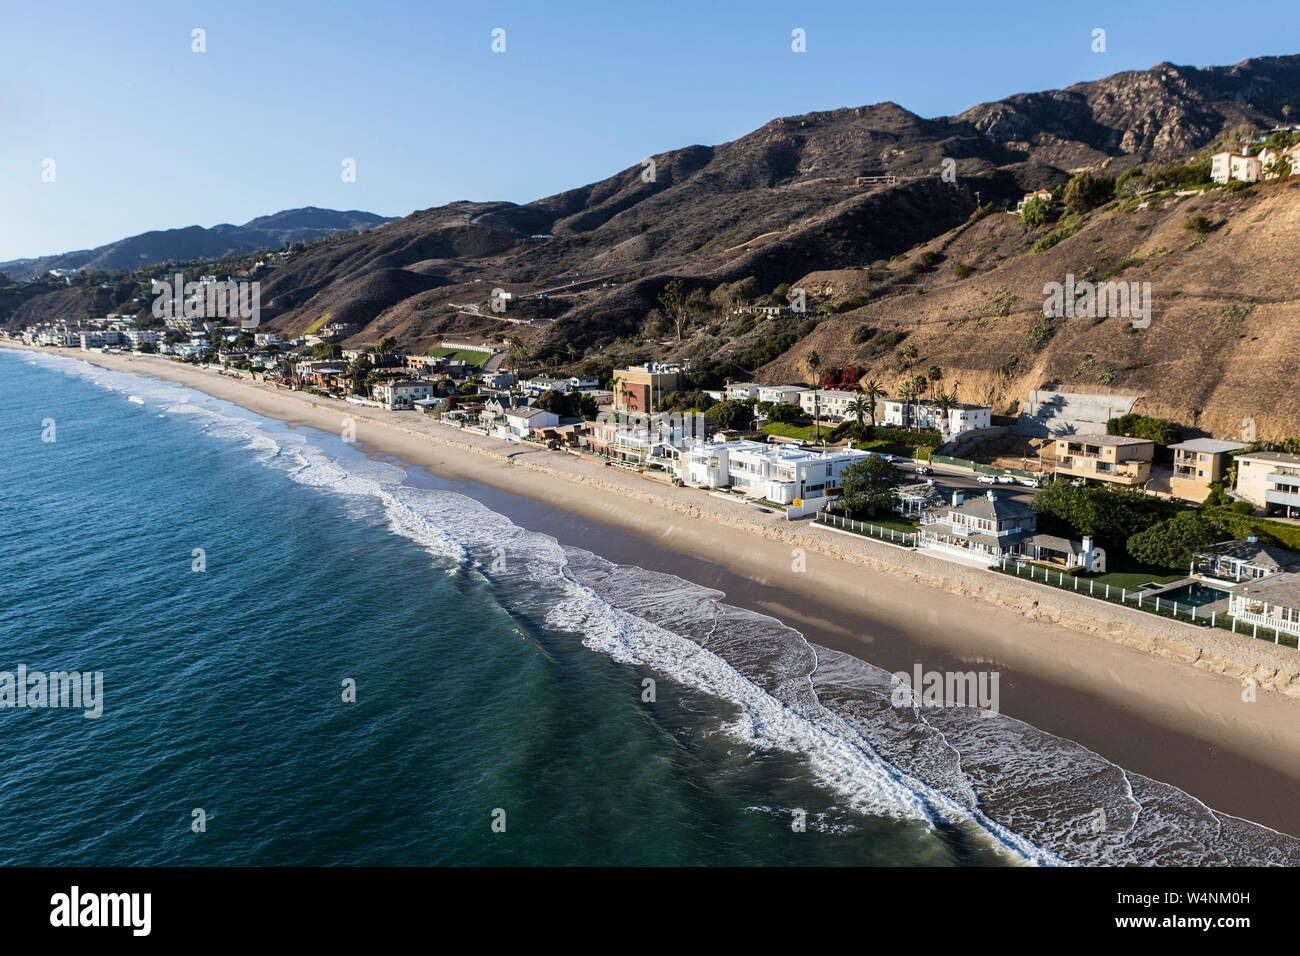 Aerial view of upscale beach homes and the Santa Monica Mountains near Los Angeles in scenic Malibu, California. Stock Photo